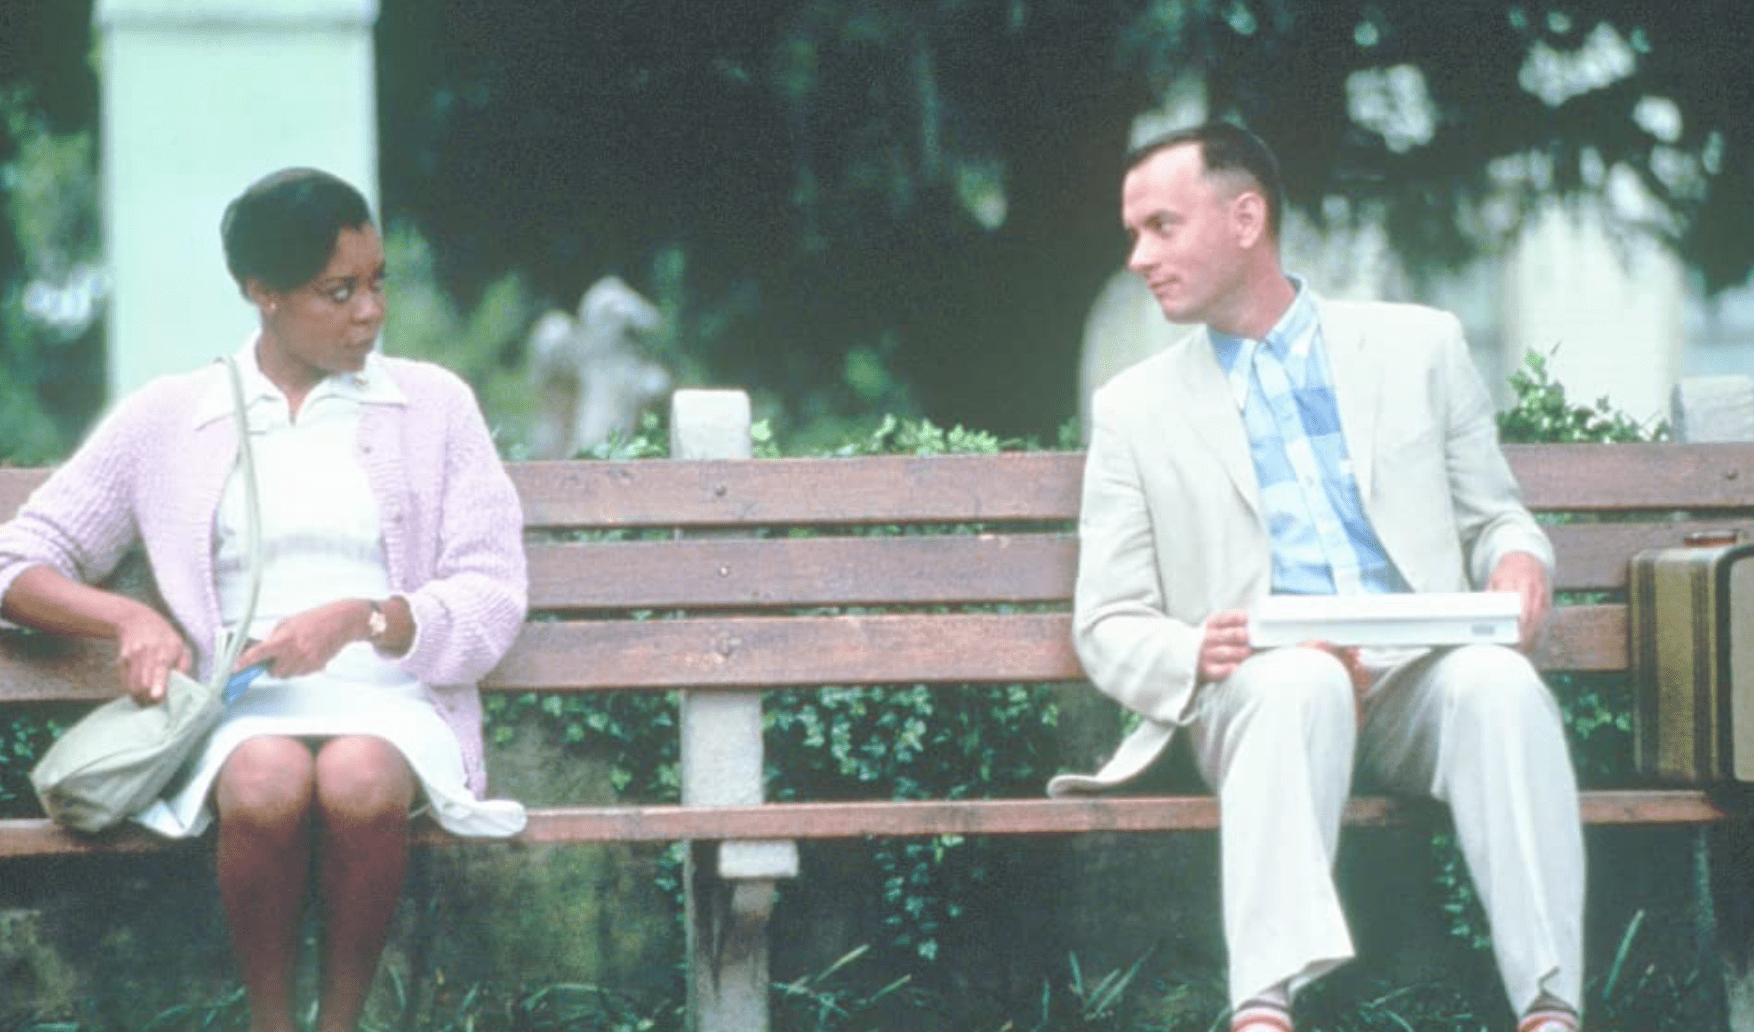 Tom Hanks as the famous Forrest Gump in this scene from Netflix